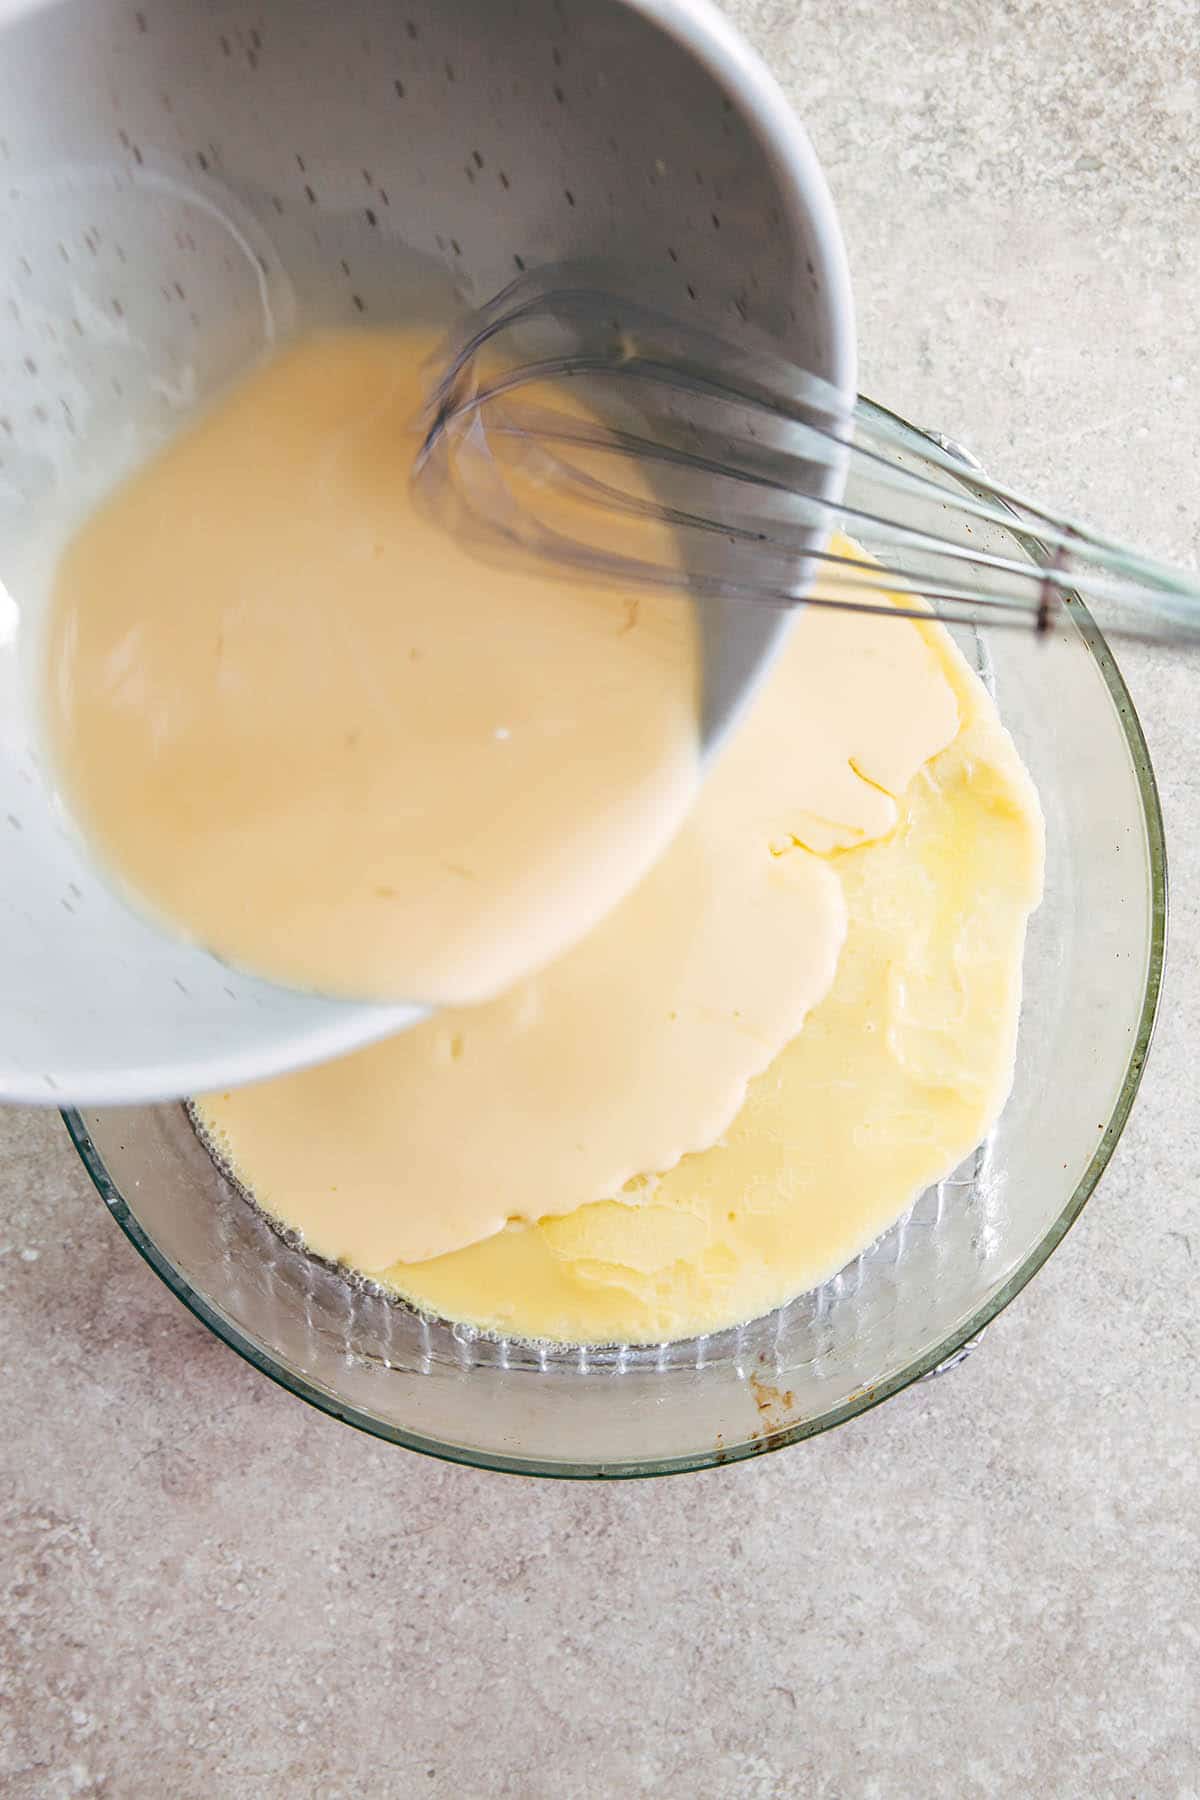 A bowl of batter being held over a baking dish with the batter being coaxed out of the bowl with a small whisk.